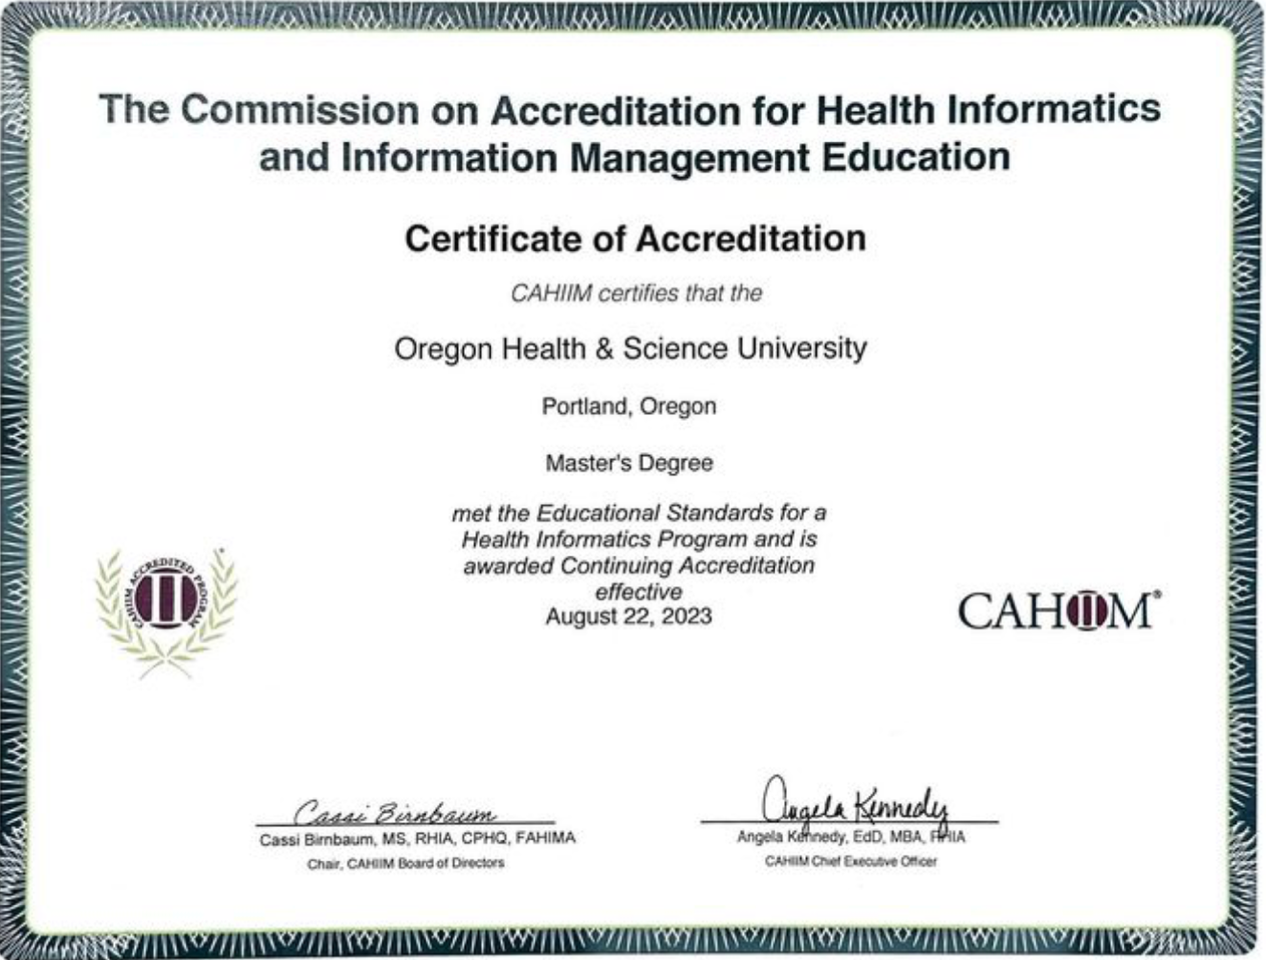 CAHIIM certificate for masters degrees